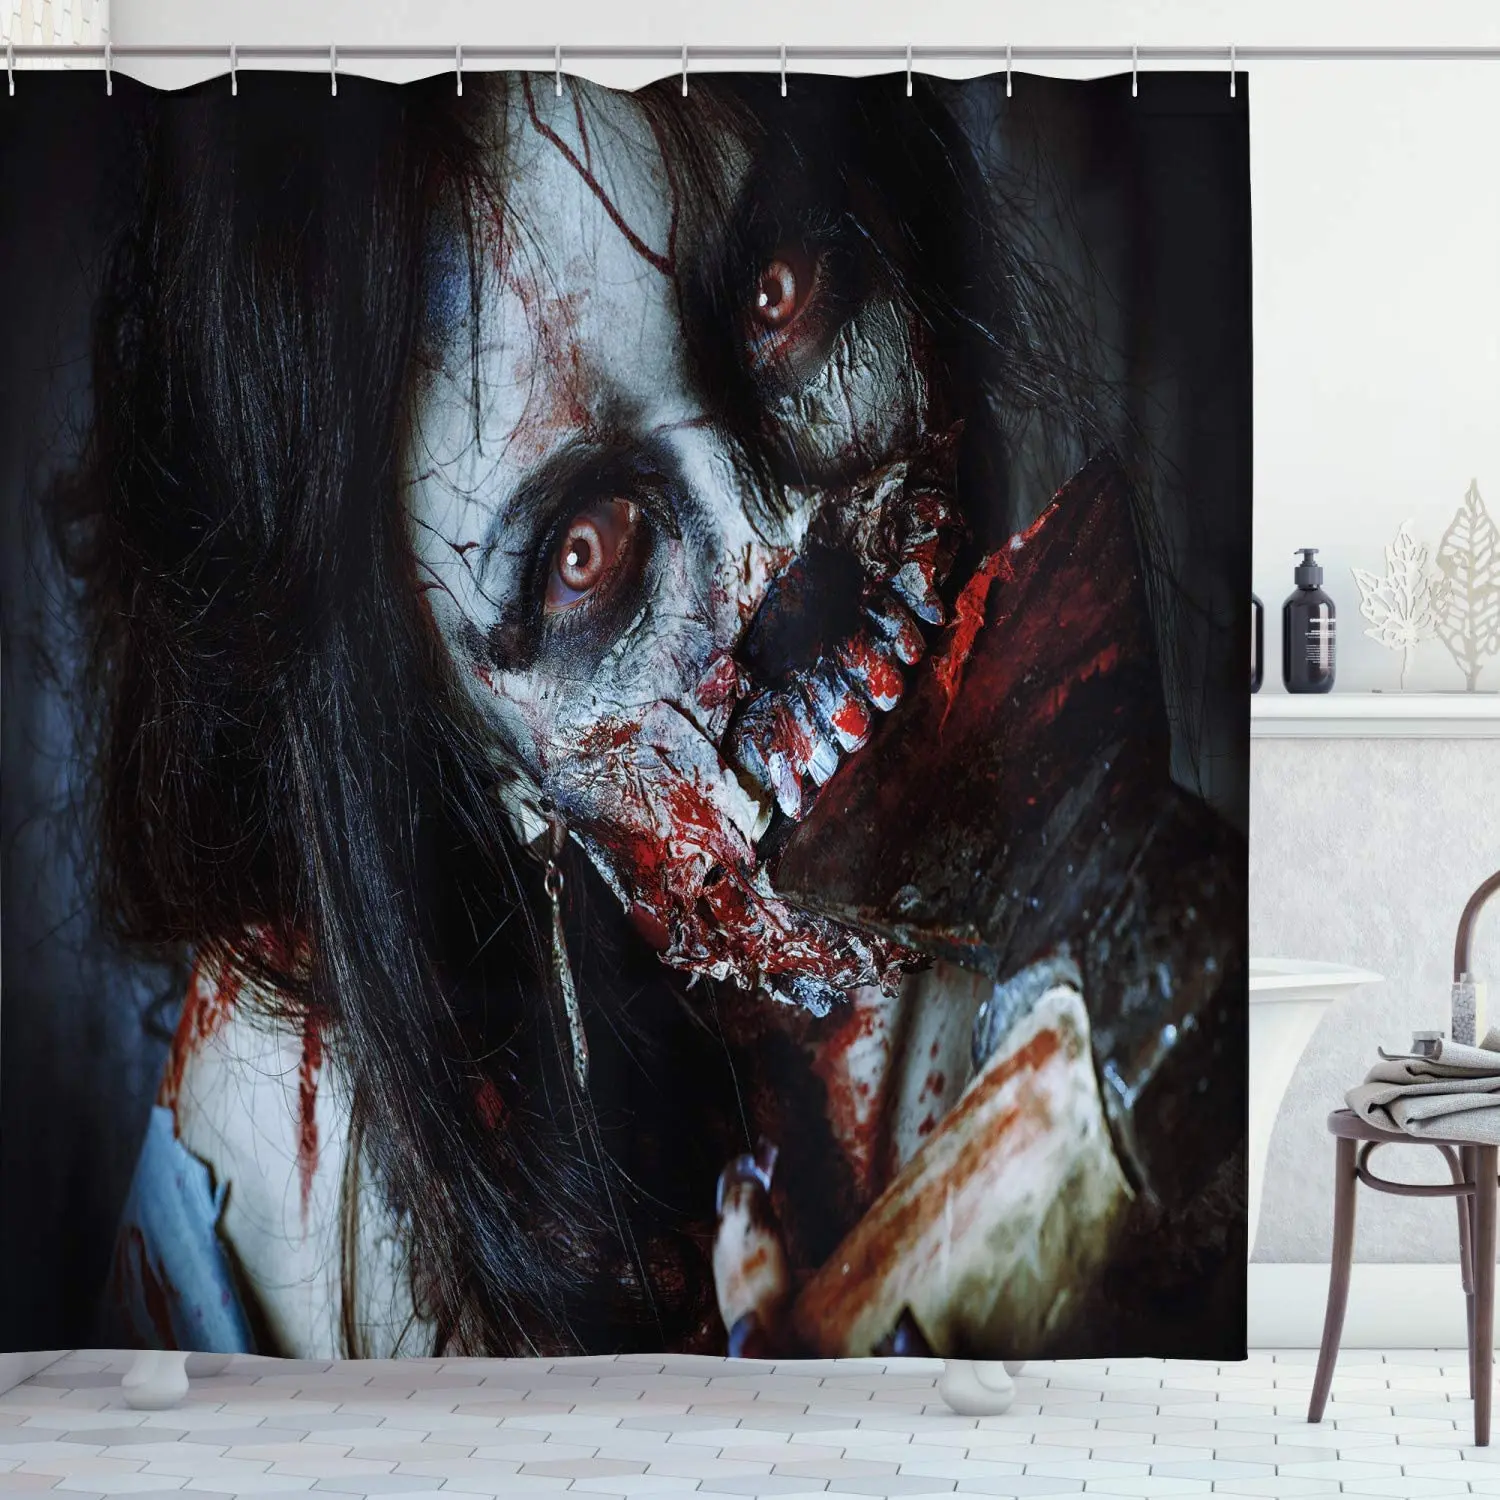 

Halloween Zombie Shower Curtain,Scary Dead Woman with A Bloody Tool Evil Fantasy Gothic Mystery Halloween Bathroom Curtain Set